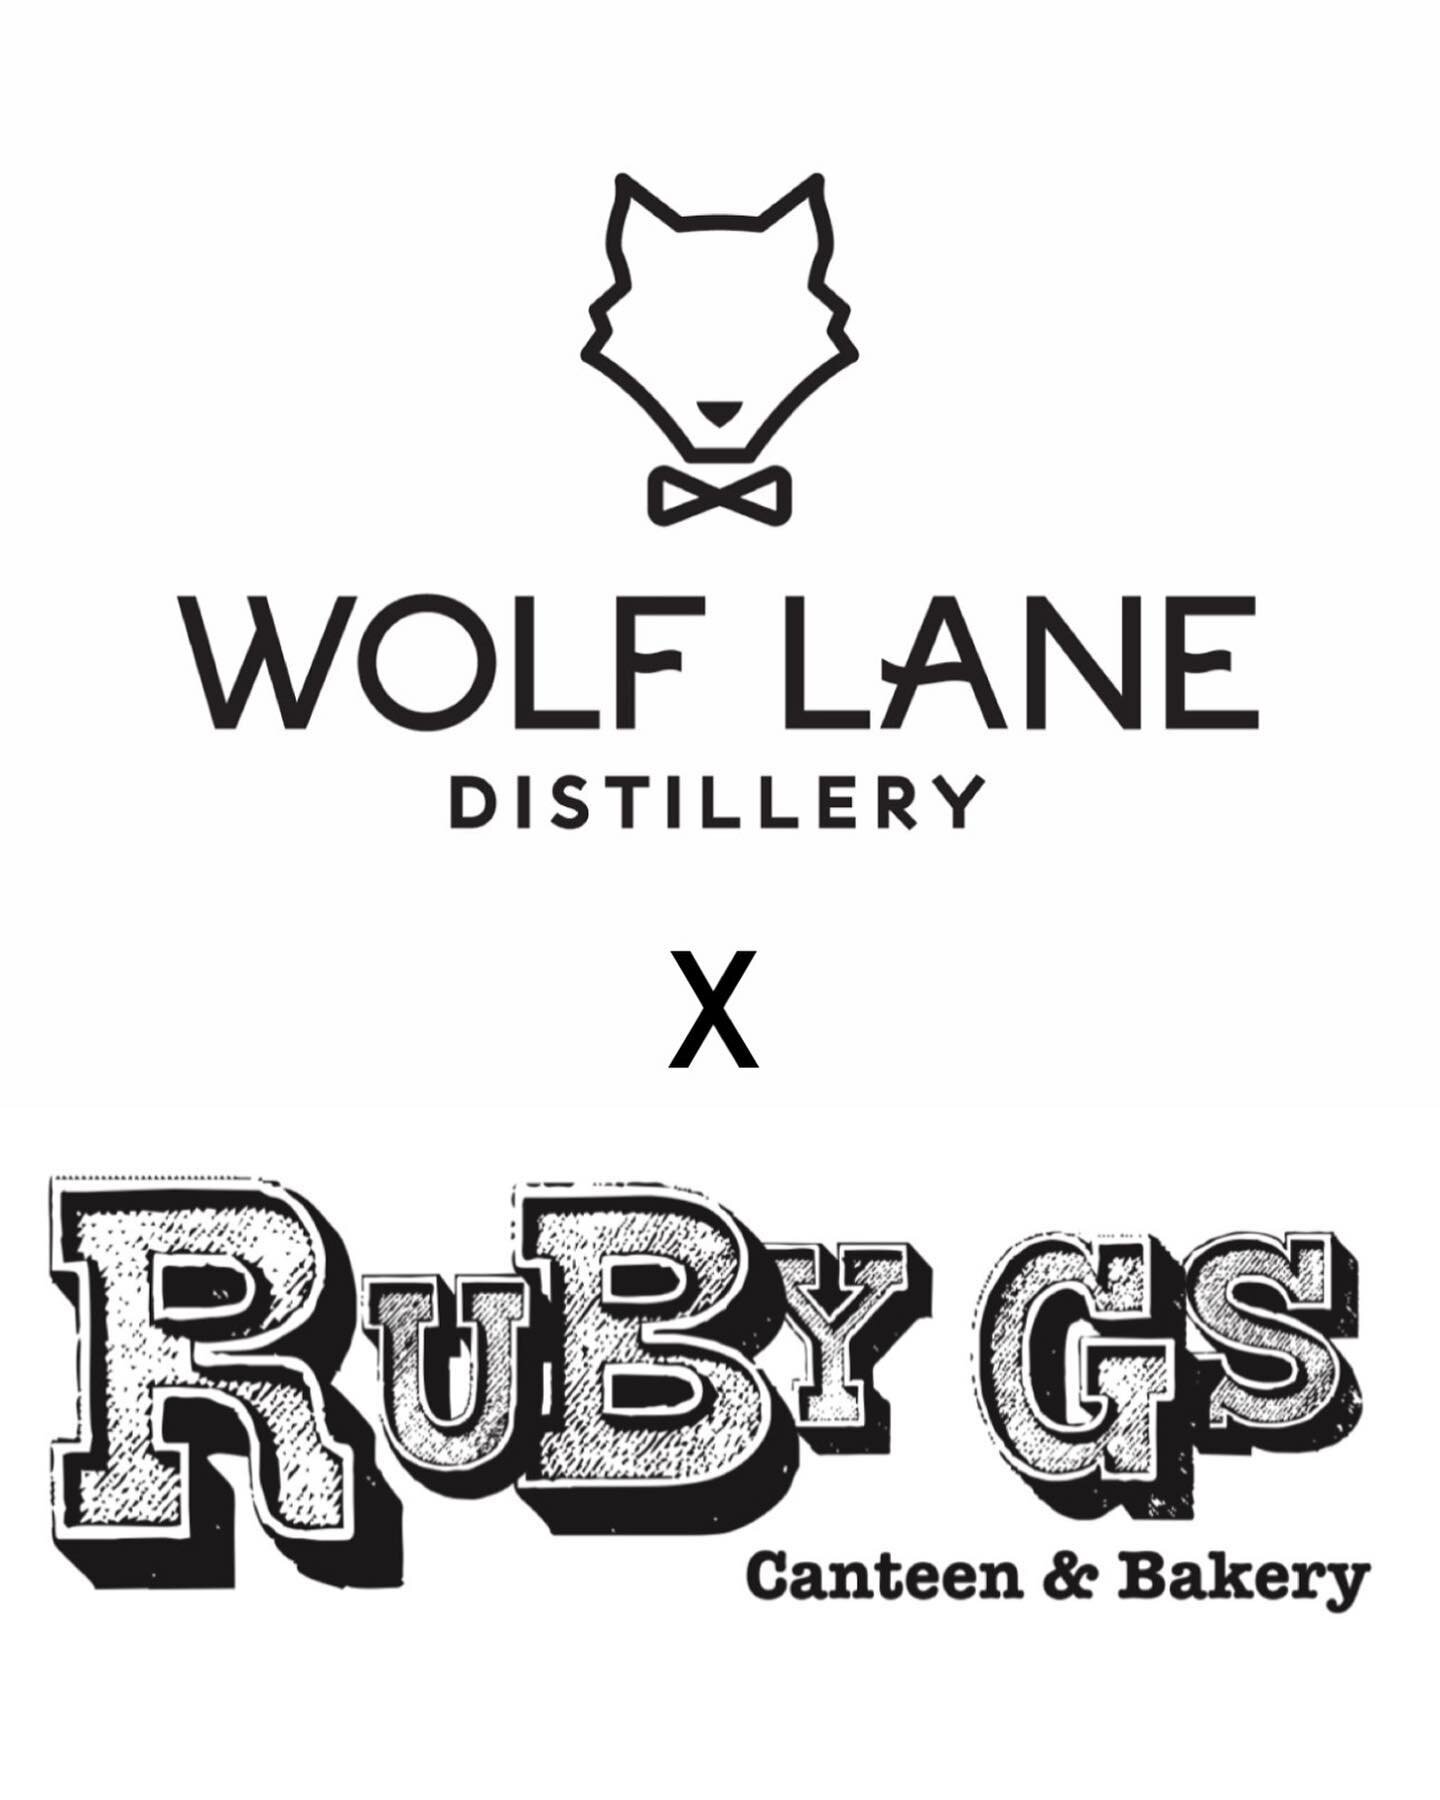 WOLF LANE BAR TAKEOVER!

On Friday 26th May, Wolf Lane is collaborating with Ruby G&rsquo;s to bring you an awesome bar takeover accompanied by delicious street food!

We are joined by Sam Kennis, who is hosting a Gin &amp; Liqueur tasting at 5:30pm 